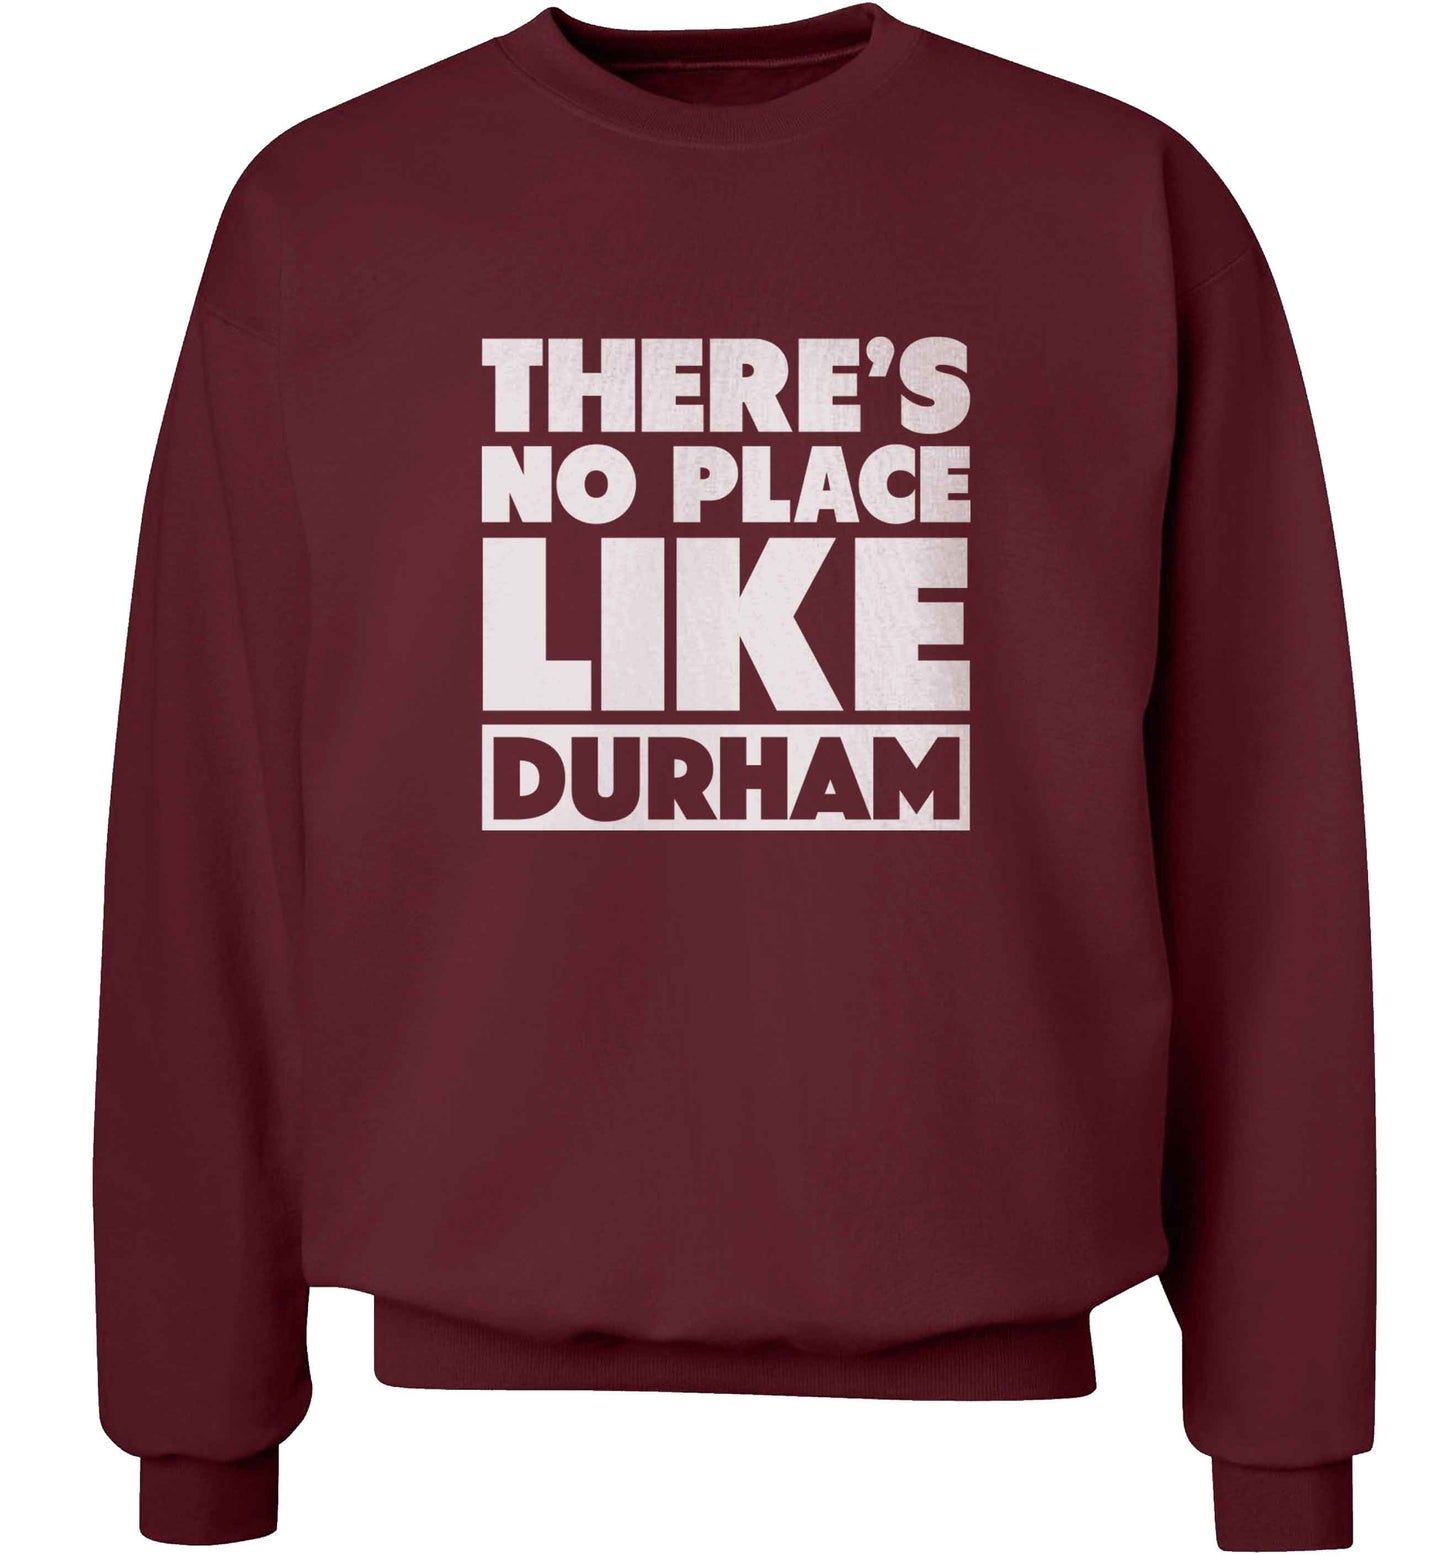 There's no place like Durham adult's unisex maroon sweater 2XL